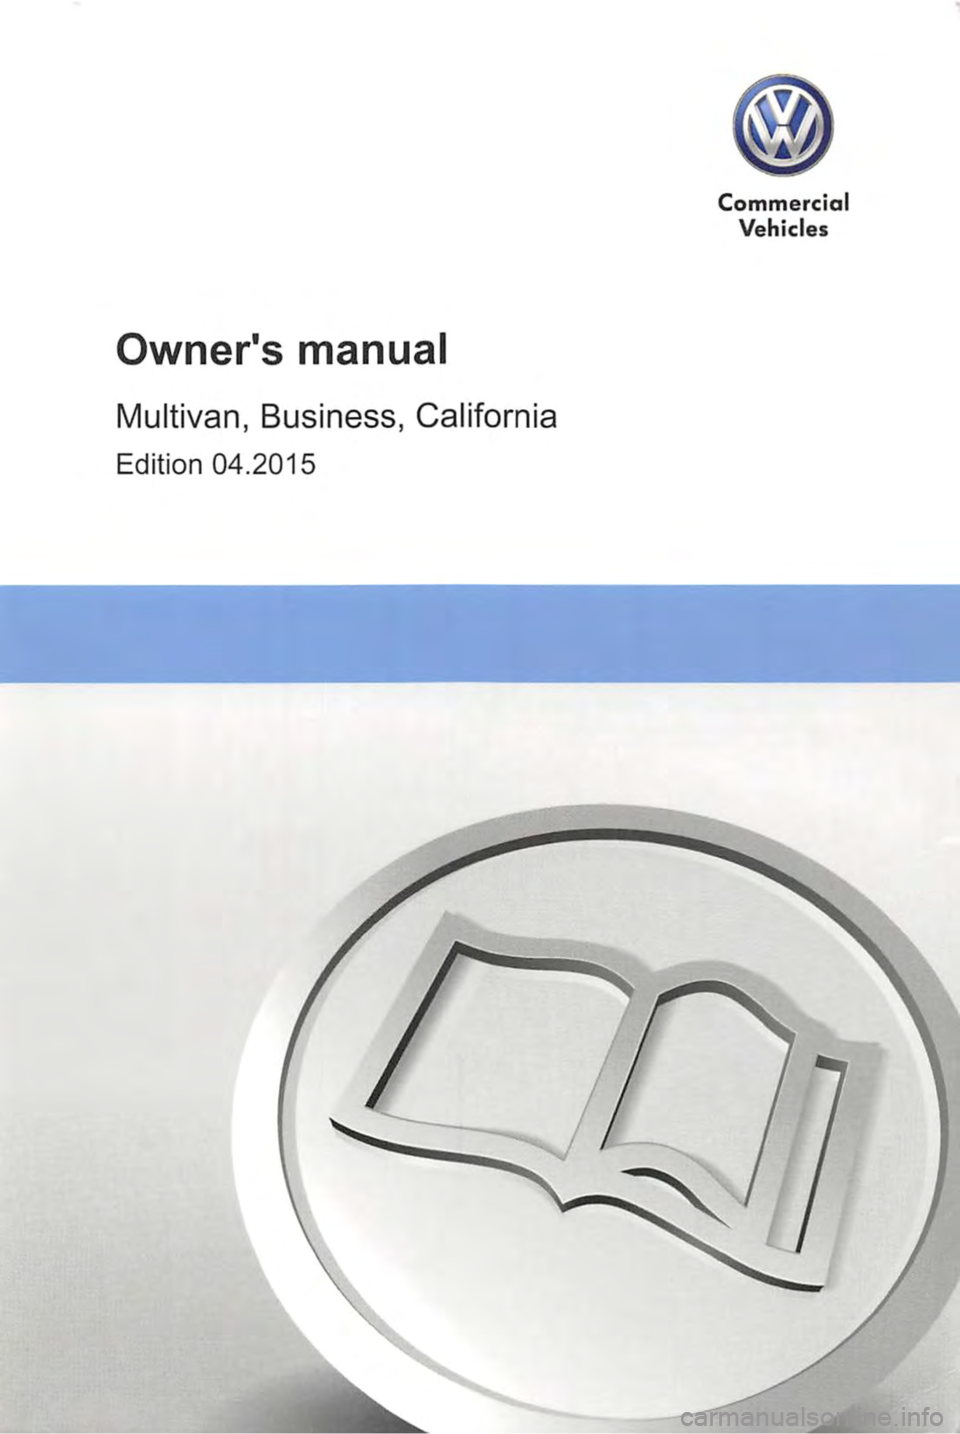 VOLKSWAGEN TRANSPORTER 2021  Owners Manual Owners manual 
Multivan, Business, California 
Edition 04.2015 
Commercial 
Vehicles  